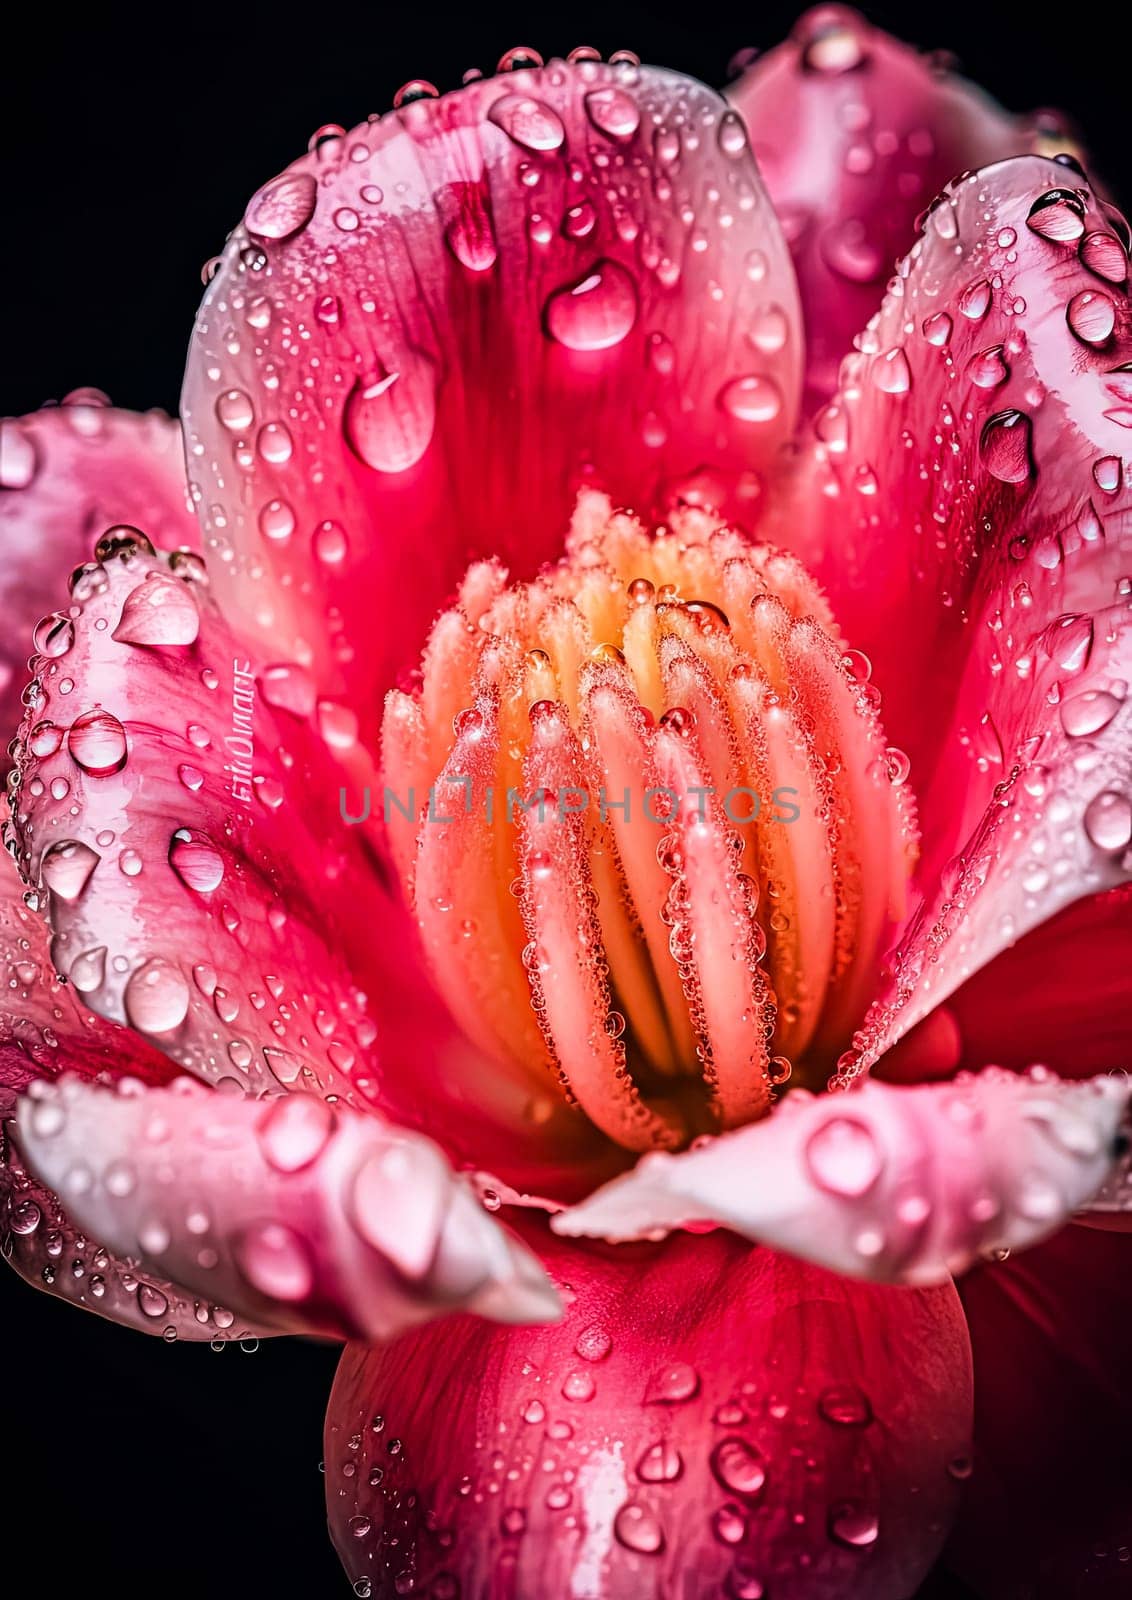 A beautiful pink flower with droplets of water on it. by Alla_Morozova93